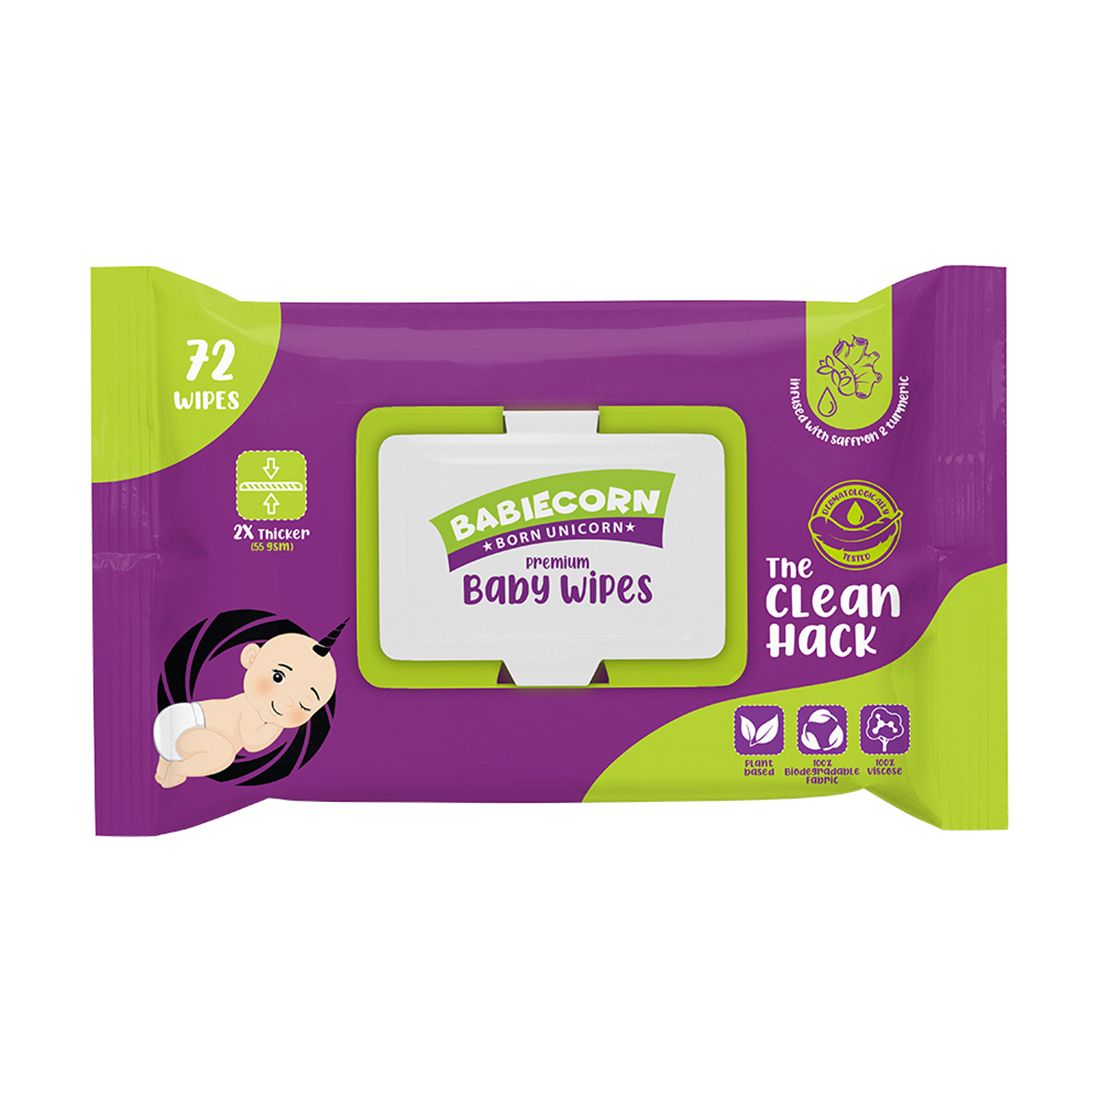 BABIECORN Premium Baby Wipes Soft & Gentle Formulated with Saffron&Turmeric pack of (72 Wipes)